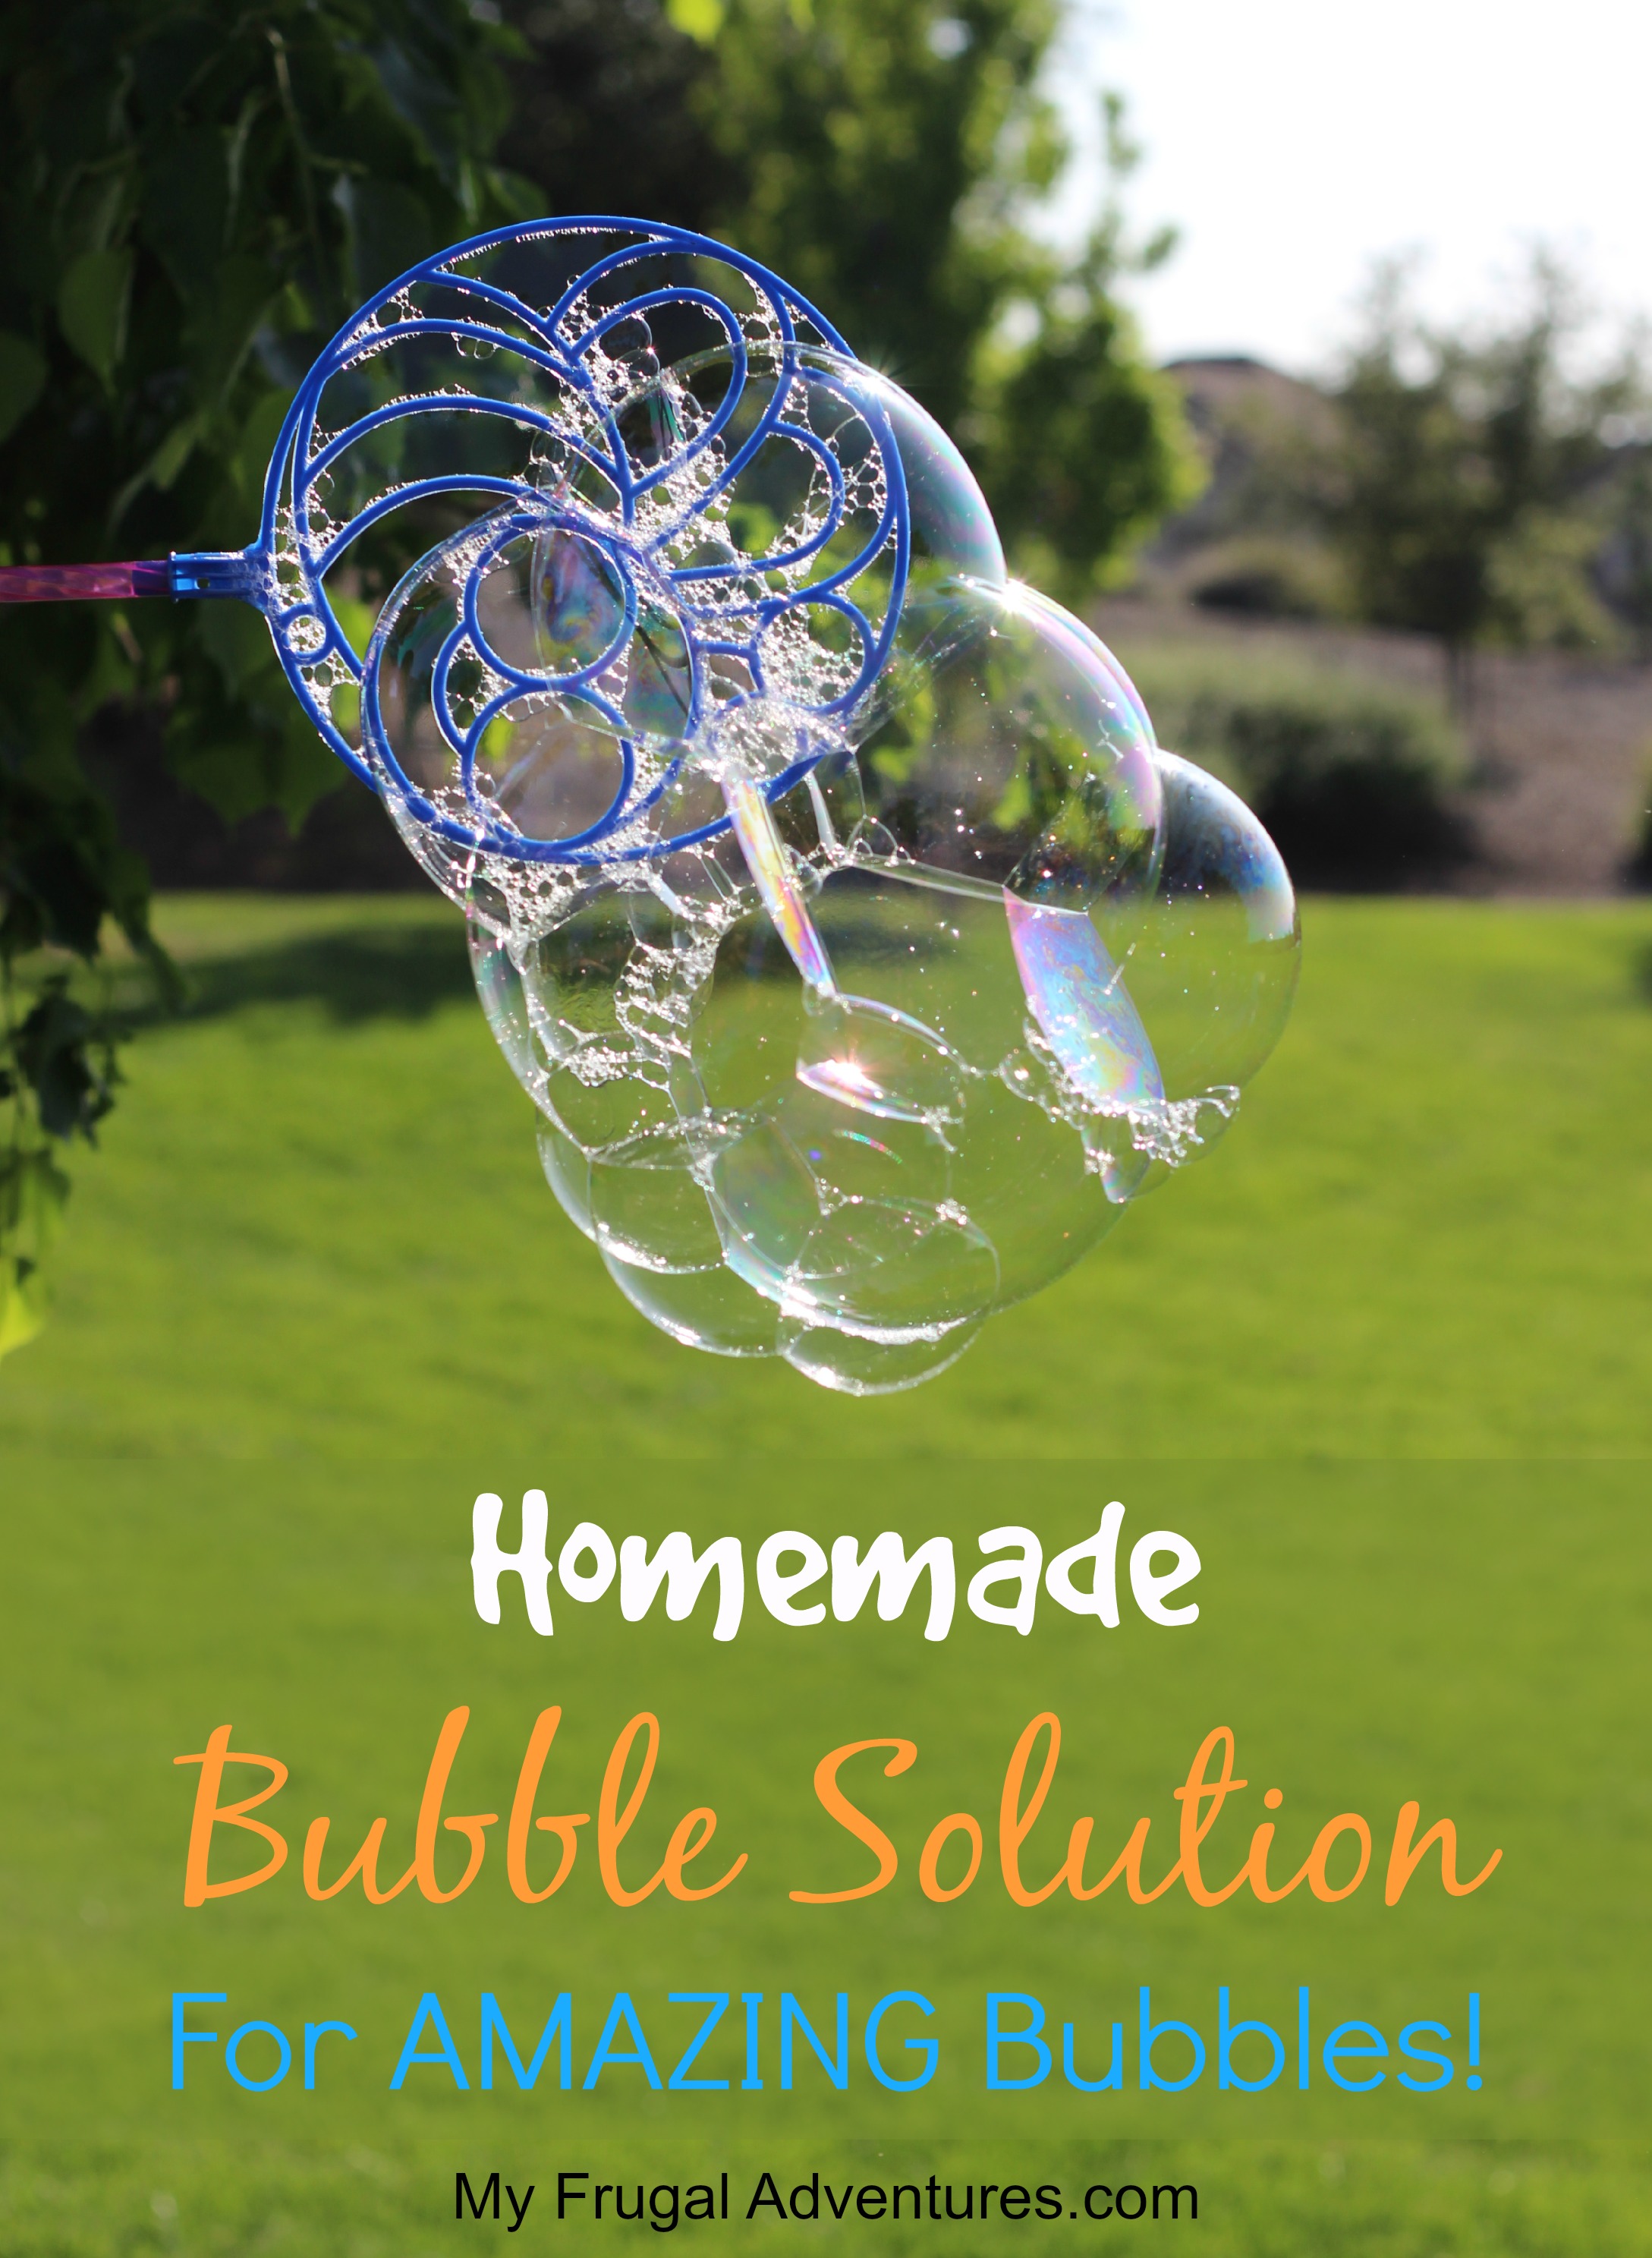 Making Giant Bubbles for Dogs! 